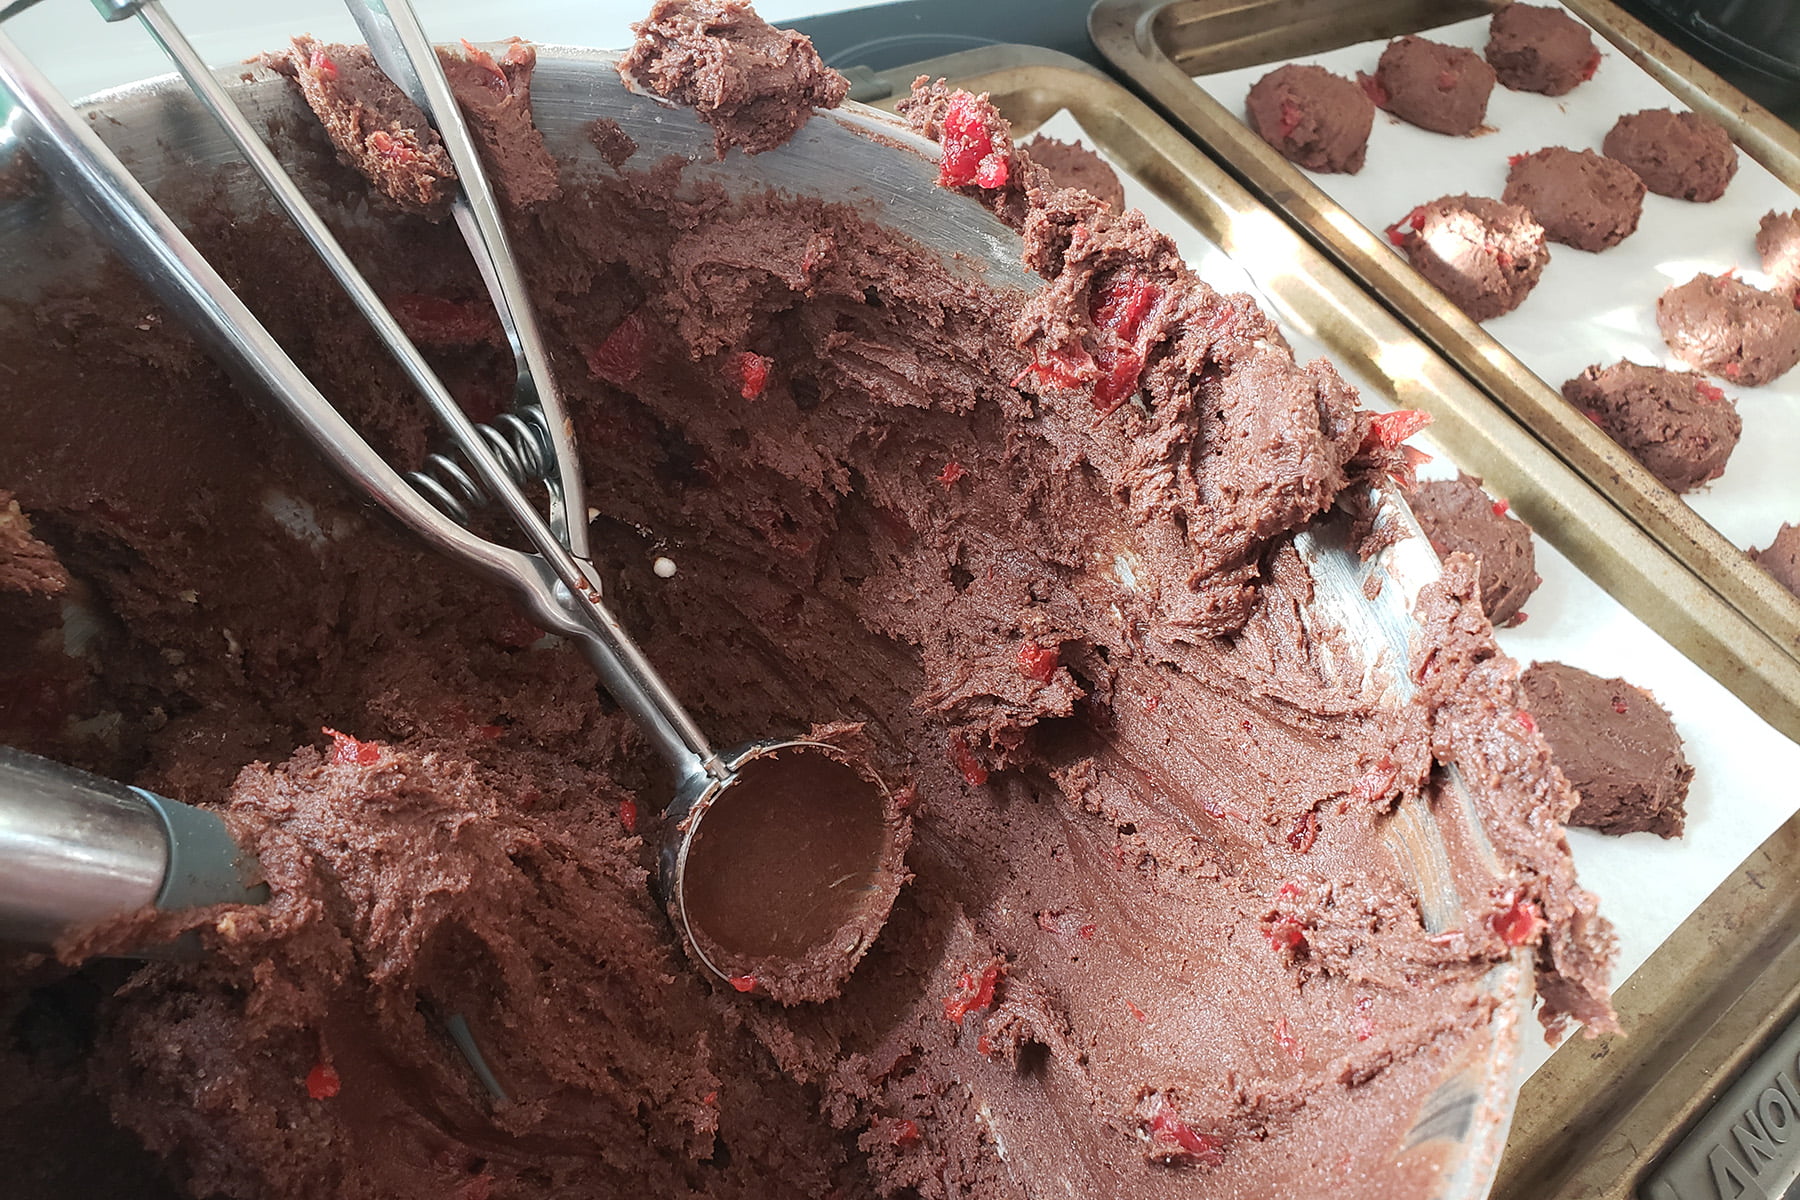 A close up view of a mixing bowl with chocolate cookie dough in it. The dough is generously studded with bits of maraschino cherries. An ice cream scoop rests in the dough.